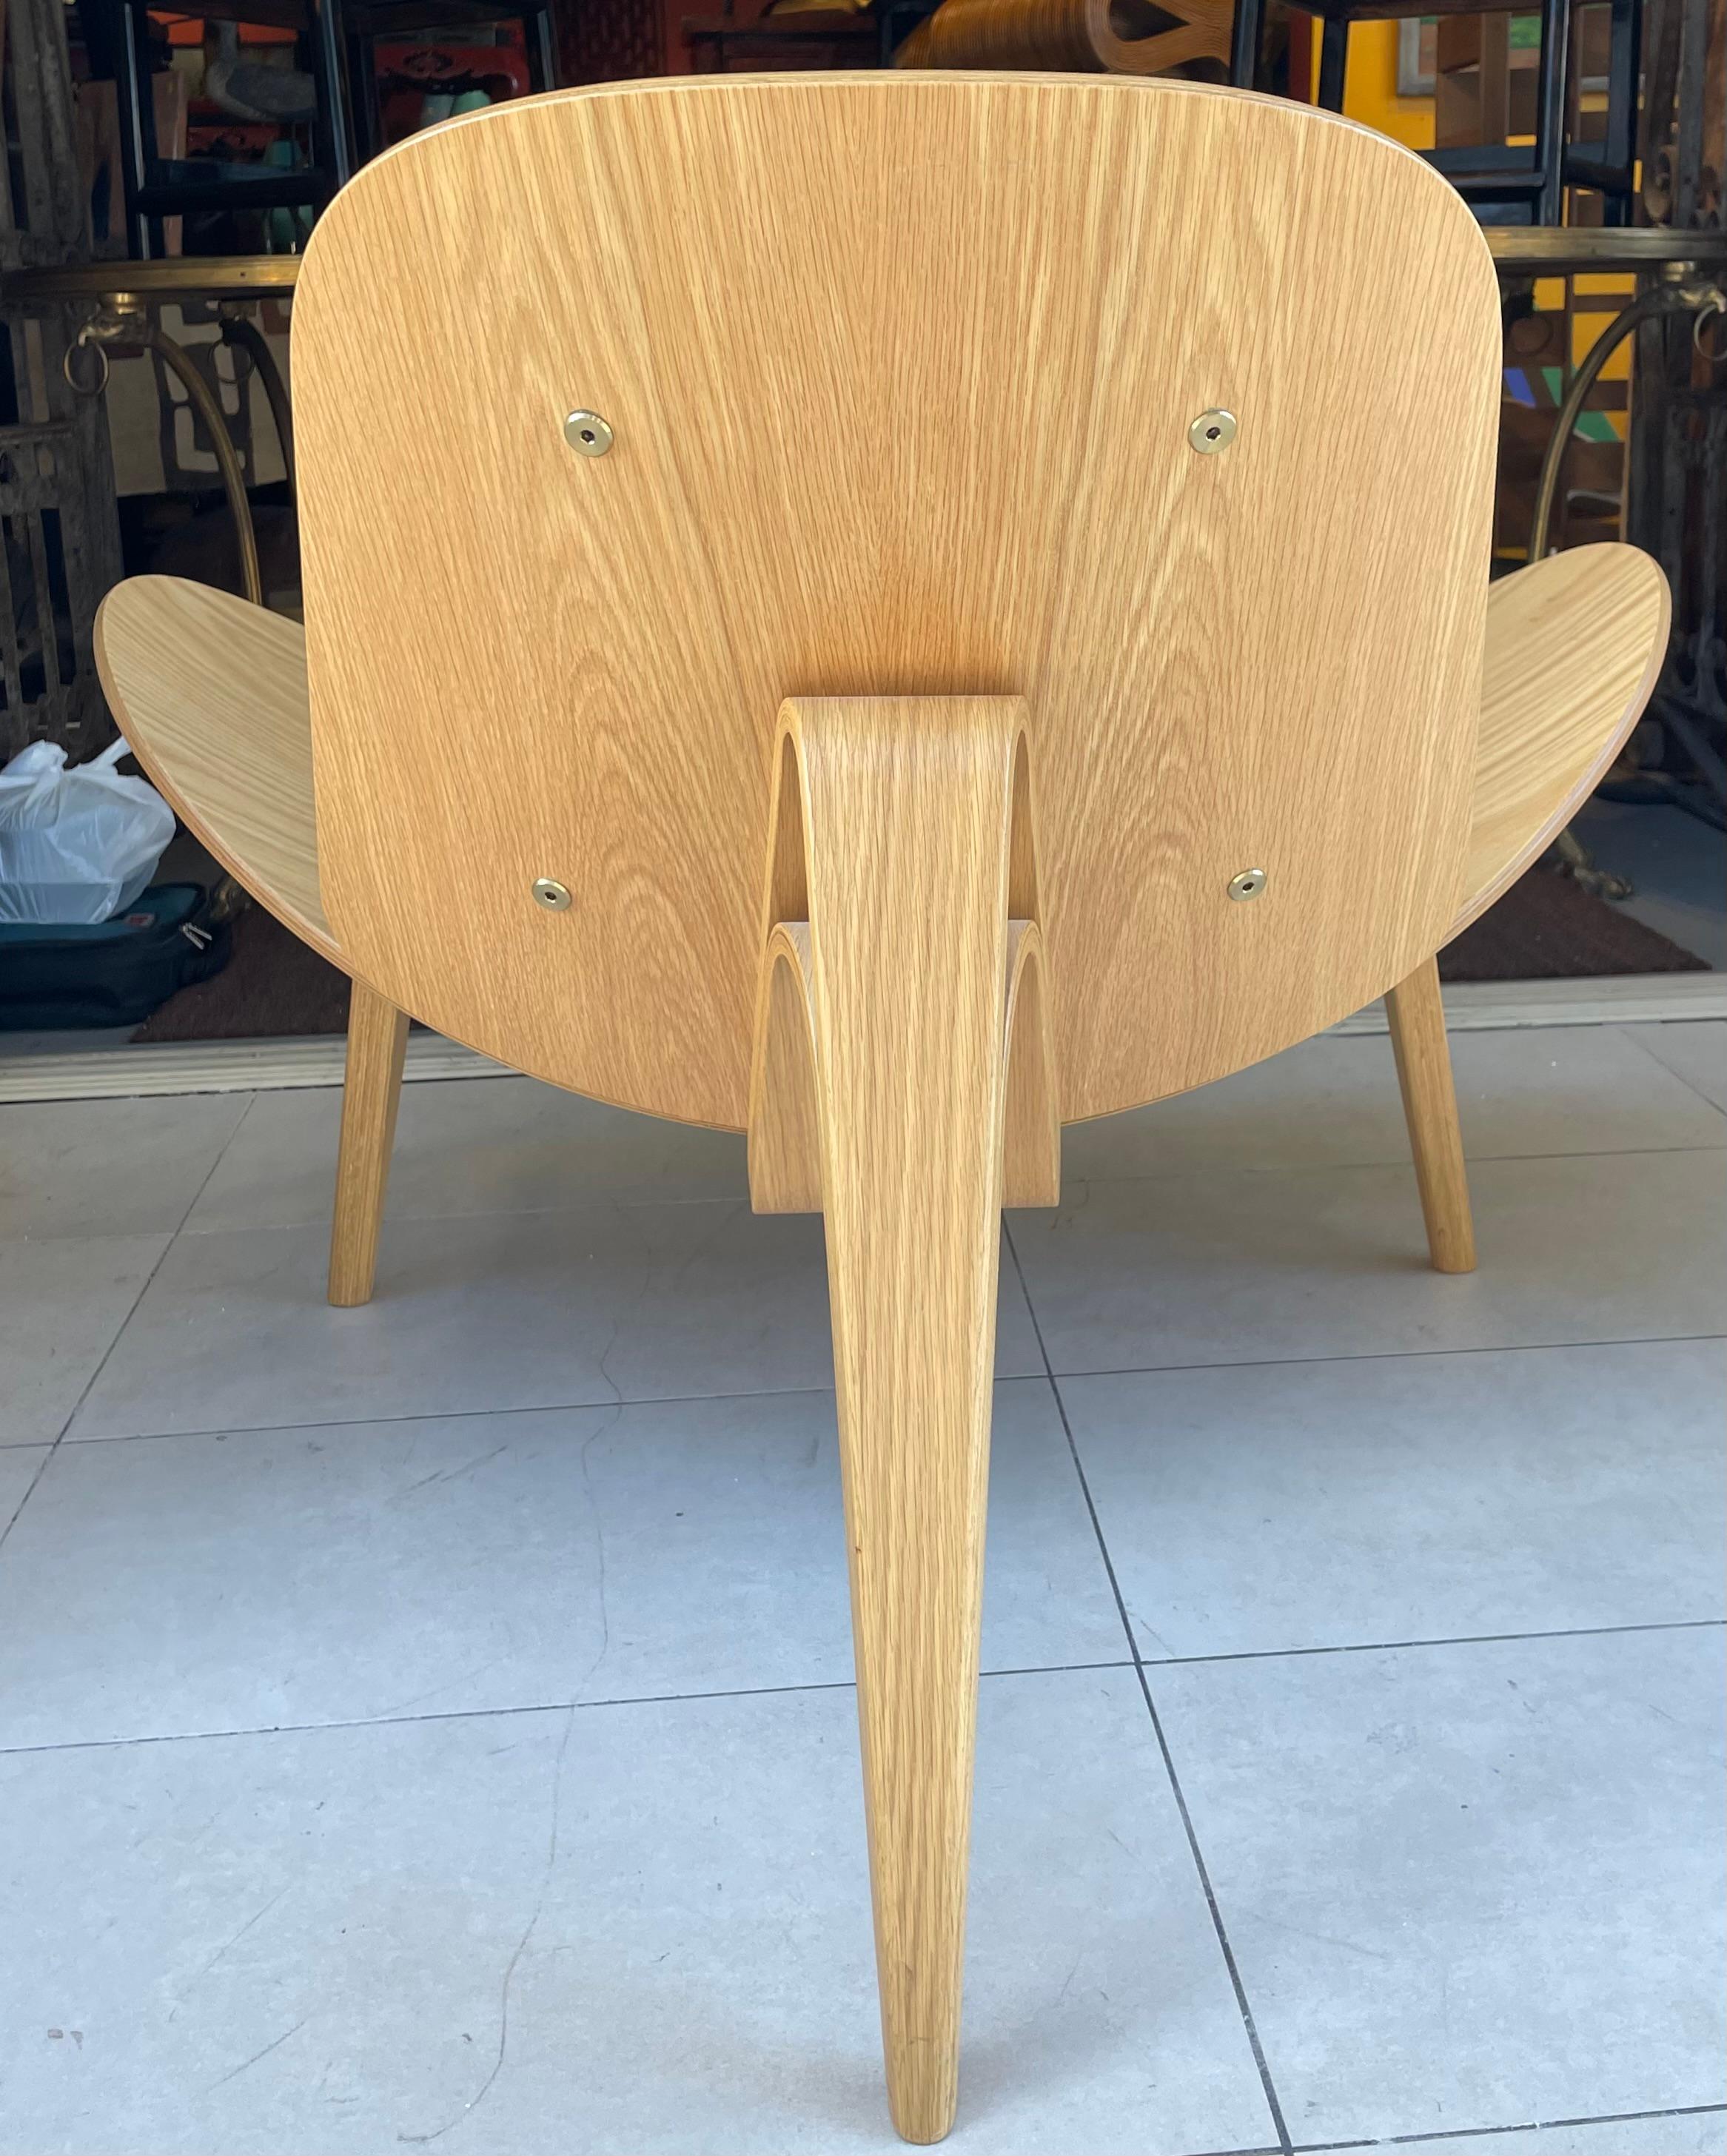 Hans Wegner 100th Anniversary Chair by Paul Smith and Carl Hansen In Good Condition For Sale In San Francisco, CA